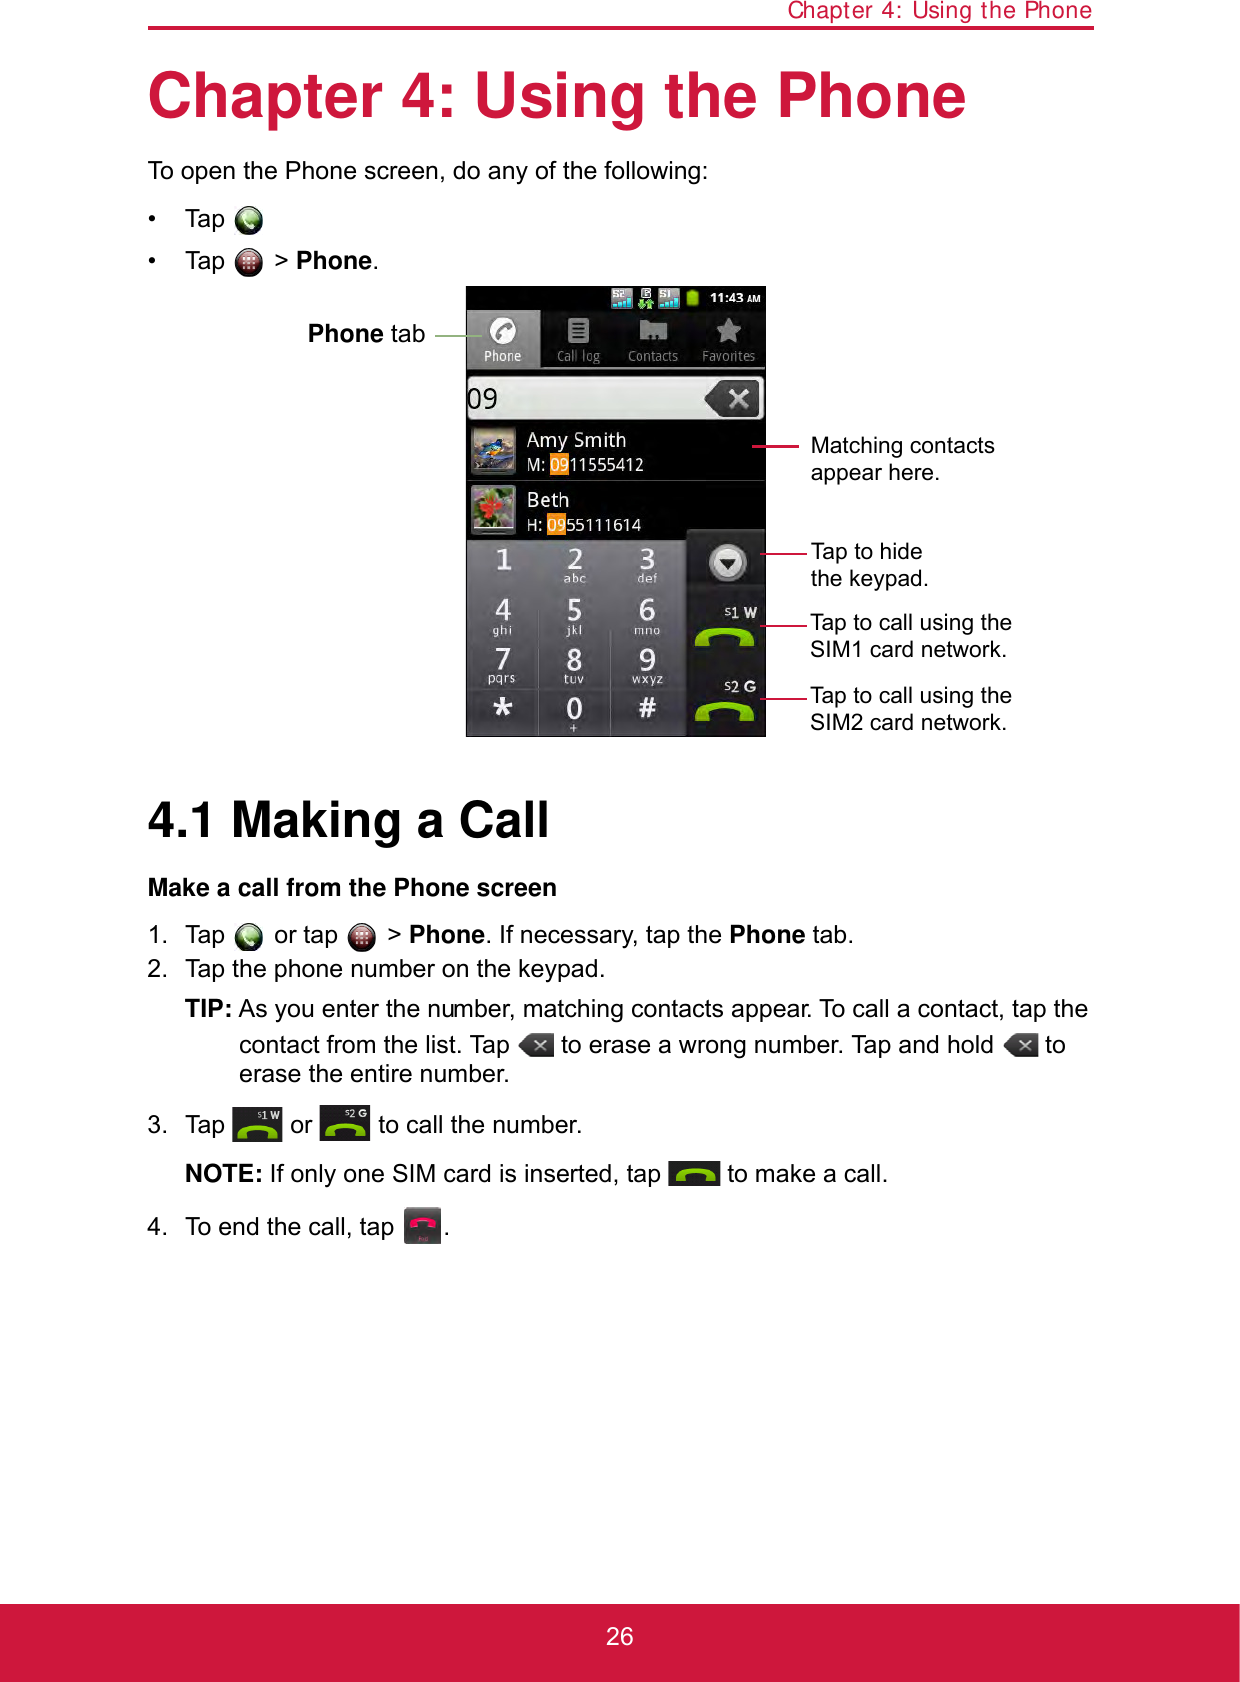 Chapter 4: Using the Phone26Chapter 4: Using the PhoneTo open the Phone screen, do any of the following:• Tap .• Tap  &gt; Phone.4.1 Making a CallMake a call from the Phone screen1. Tap  or tap  &gt; Phone. If necessary, tap the Phone tab.2. Tap the phone number on the keypad.TIP: As you enter the number, matching contacts appear. To call a contact, tap the contact from the list. Tap   to erase a wrong number. Tap and hold   to erase the entire number. 3. Tap   or   to call the number.NOTE: If only one SIM card is inserted, tap   to make a call.4. To end the call, tap  .Tap to call using the SIM1 card network.Tap to call using the SIM2 card network.Phone tabTap to hide the keypad.Matching contacts appear here.